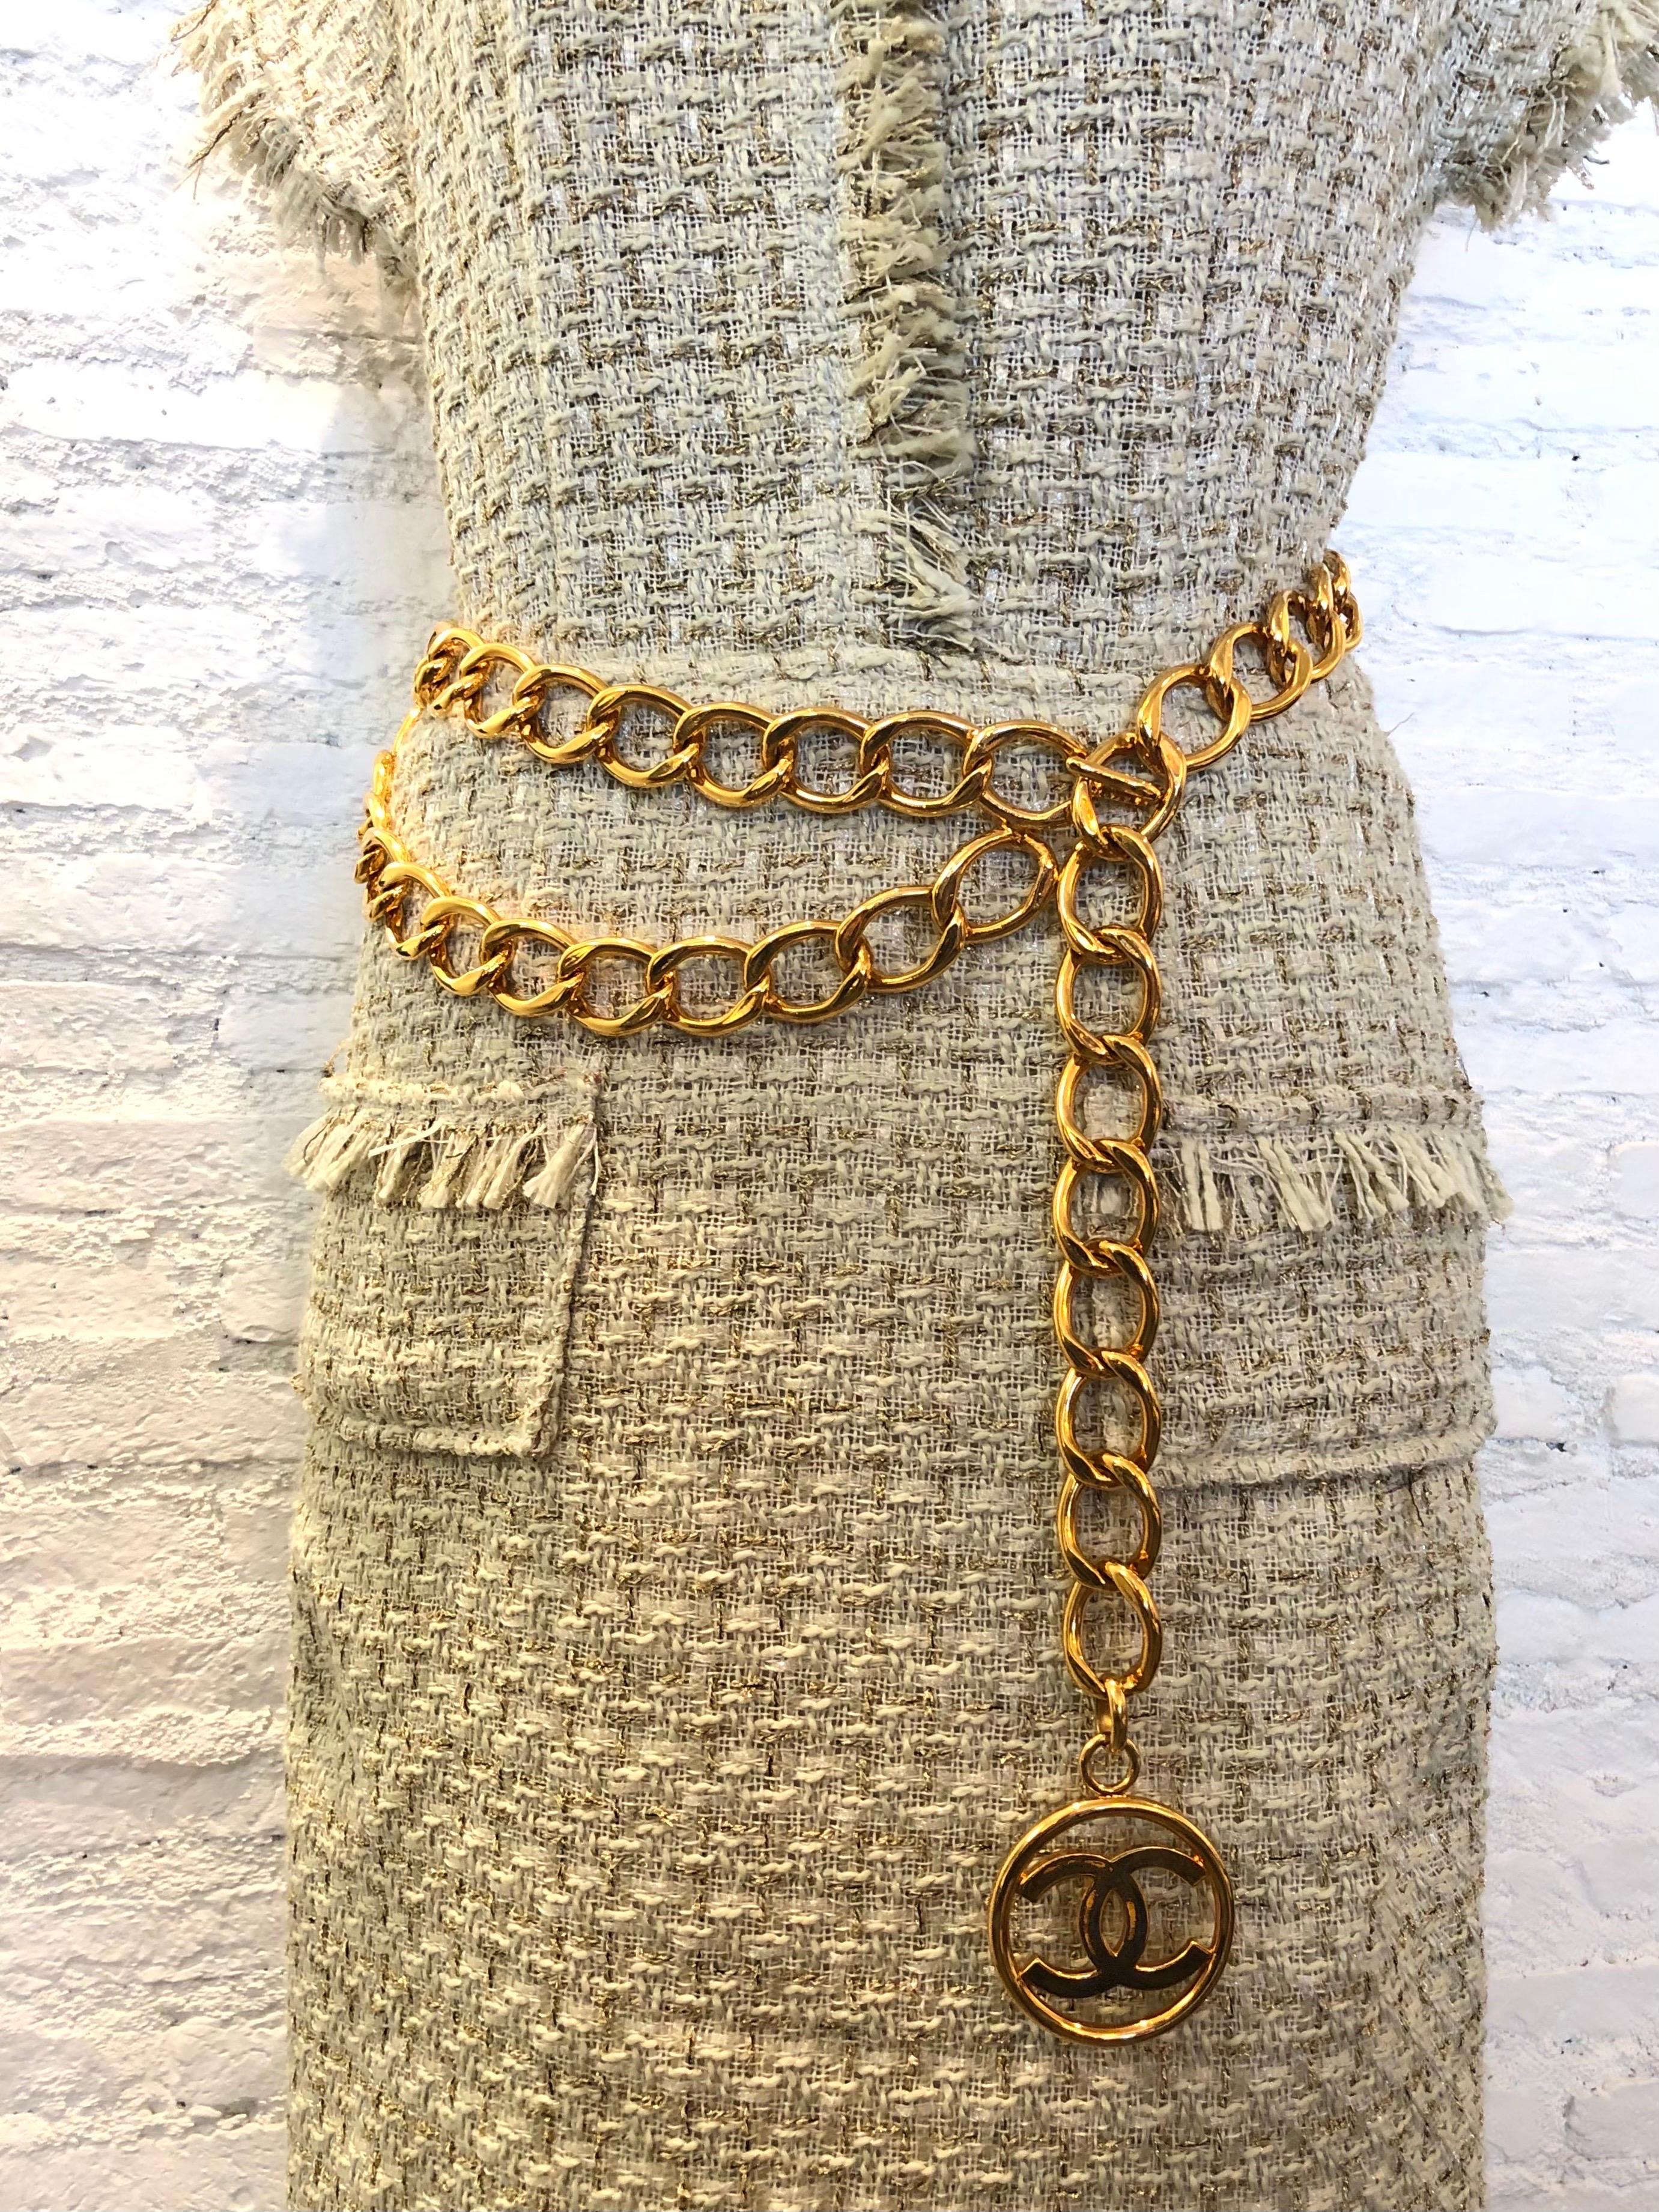 This vintage CHANEL chain belt is crafted of sturdy gold toned chains featuring a massive CC charm. Adjustable hook fastening. Chain excl. charm measures approximately 38 inches (96.5 cm) CC charm 5.6 cm. Stamped CHANEL 93A made in France. Comes